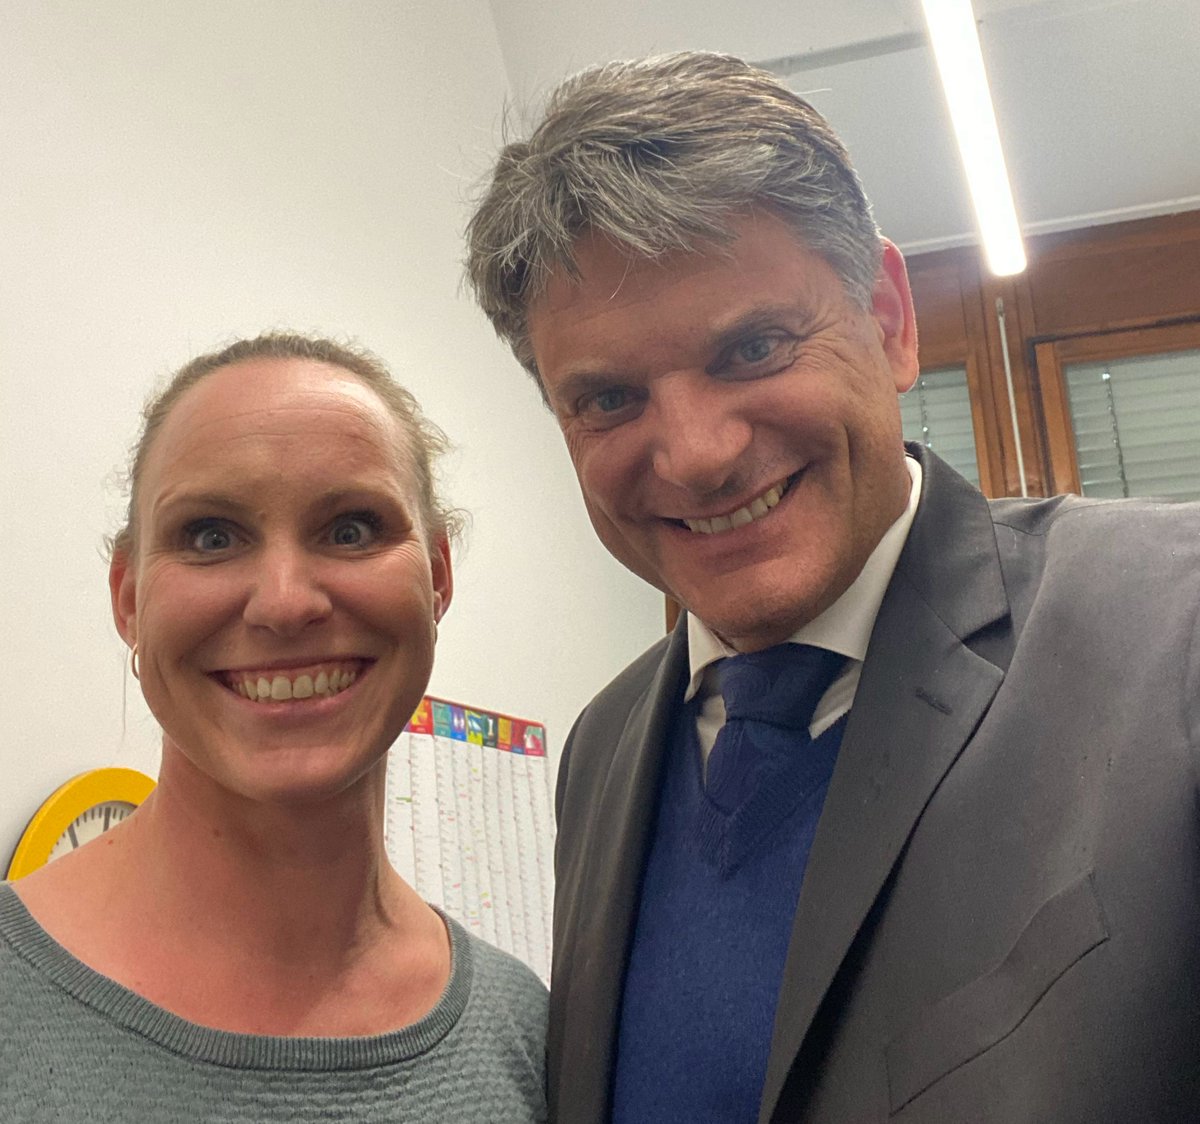 #FAUproud: I visited Dr. Jennifer Munkert, #FAU's Pharmaceutical Biology. She received the Award for Excellent Teaching from State Minister @MarkusBlume. This is a good reason to celebrate and to send heartfelt congratulations once again. Bravo! 👏👏 @uniFAU @stmwk_Bayern